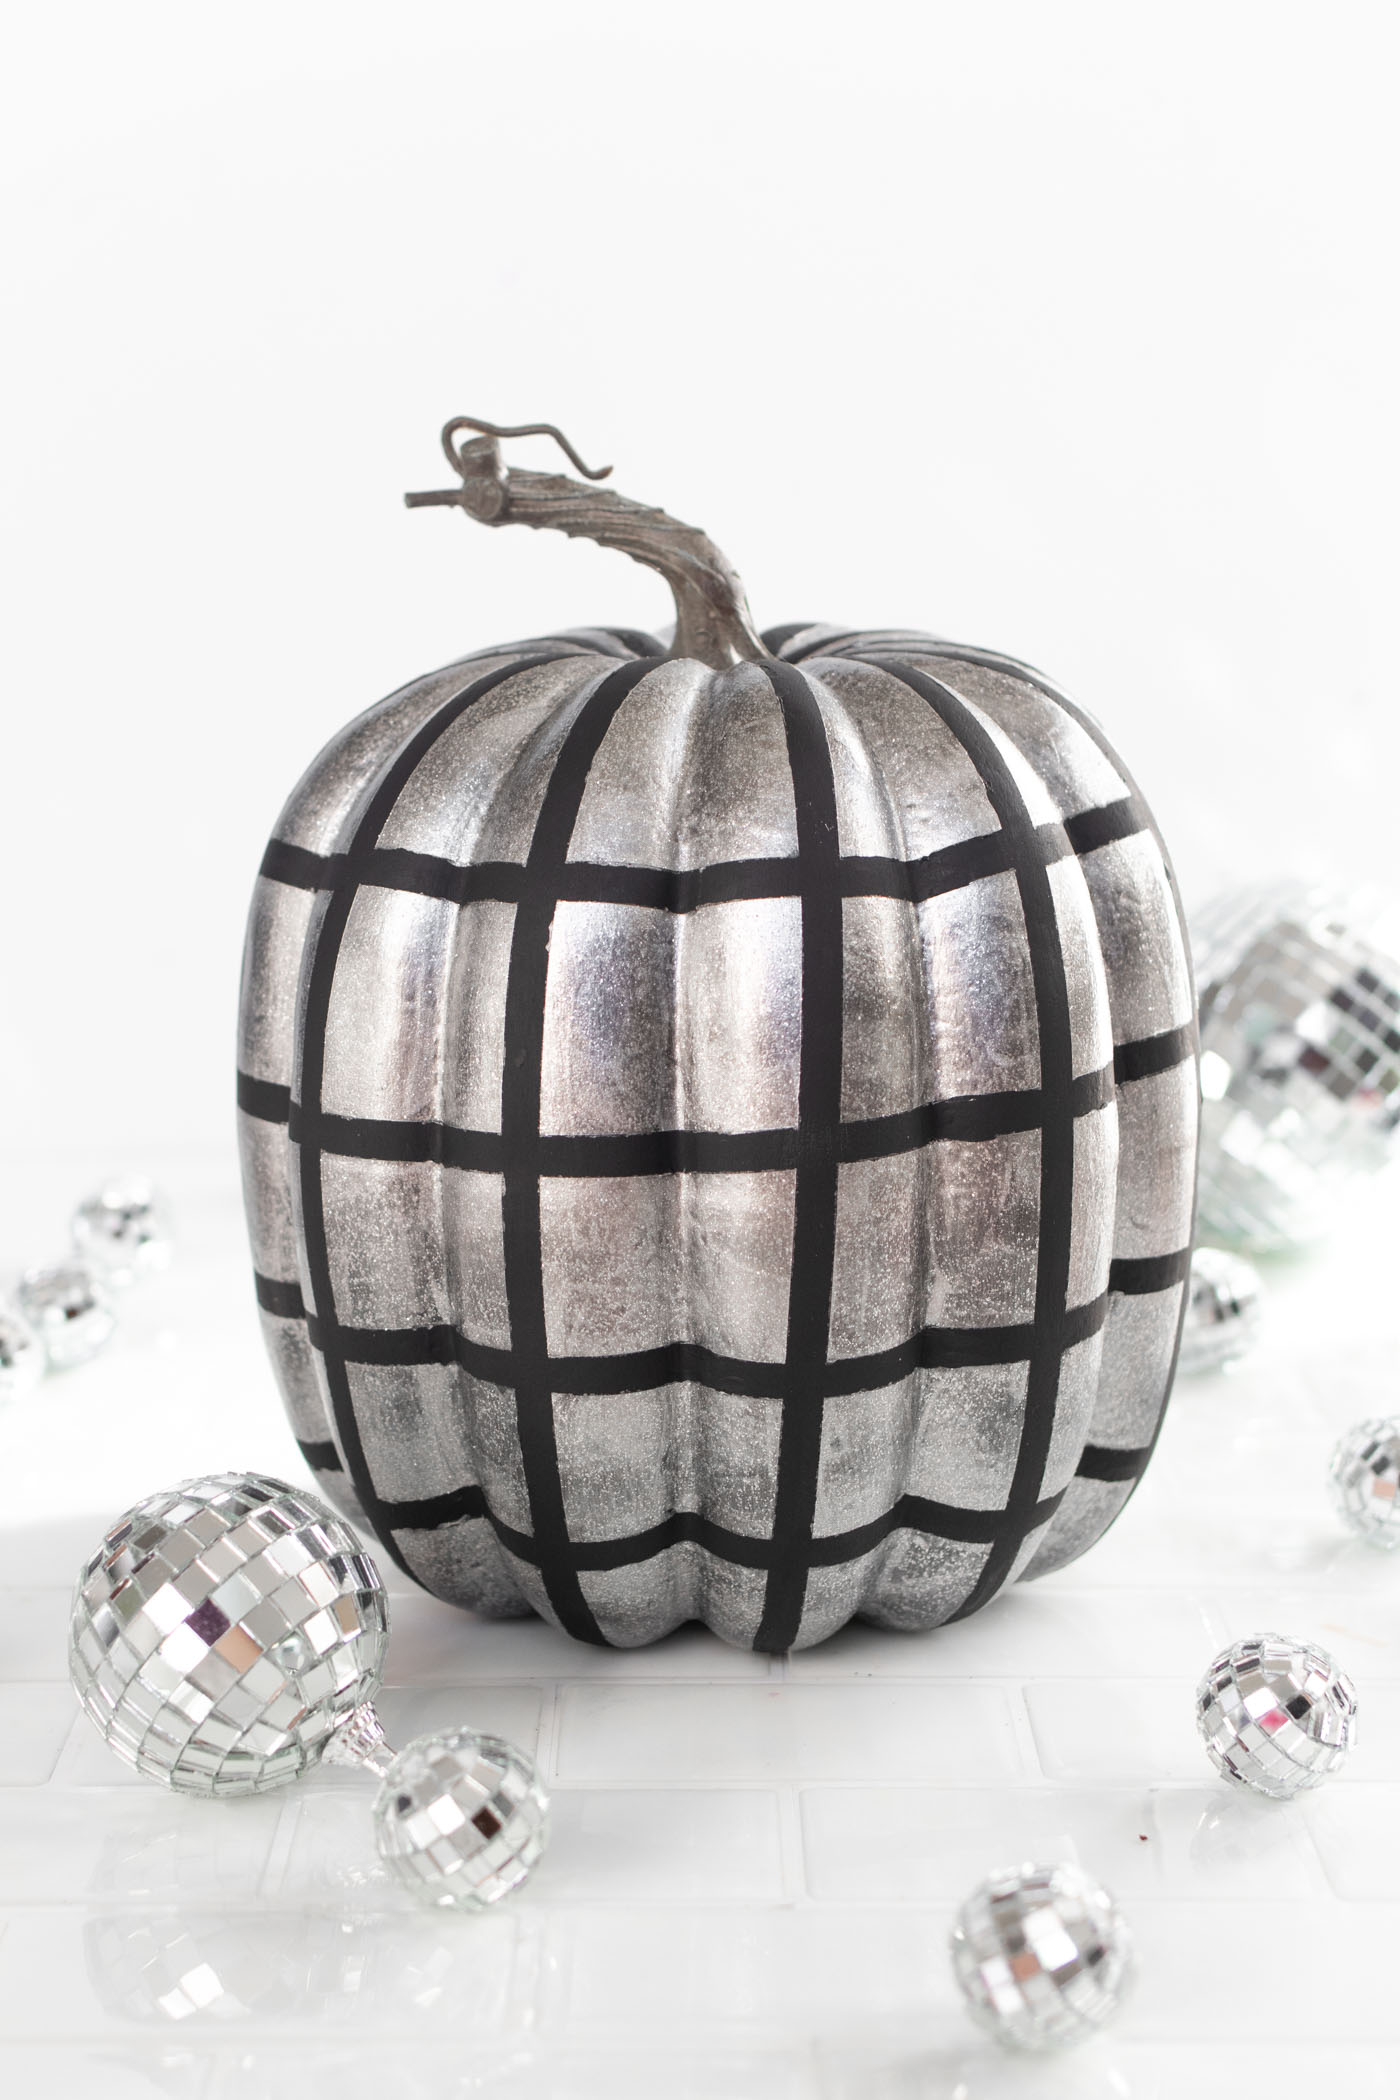 DIY Disco Ball Pumpkin Painting Idea! See how to paint pumpkins to look like sparkly disco balls for decorate for fall and Halloween! #halloween #falldecor #pumpkins #painting #discoball #diyhalloween #falldiy